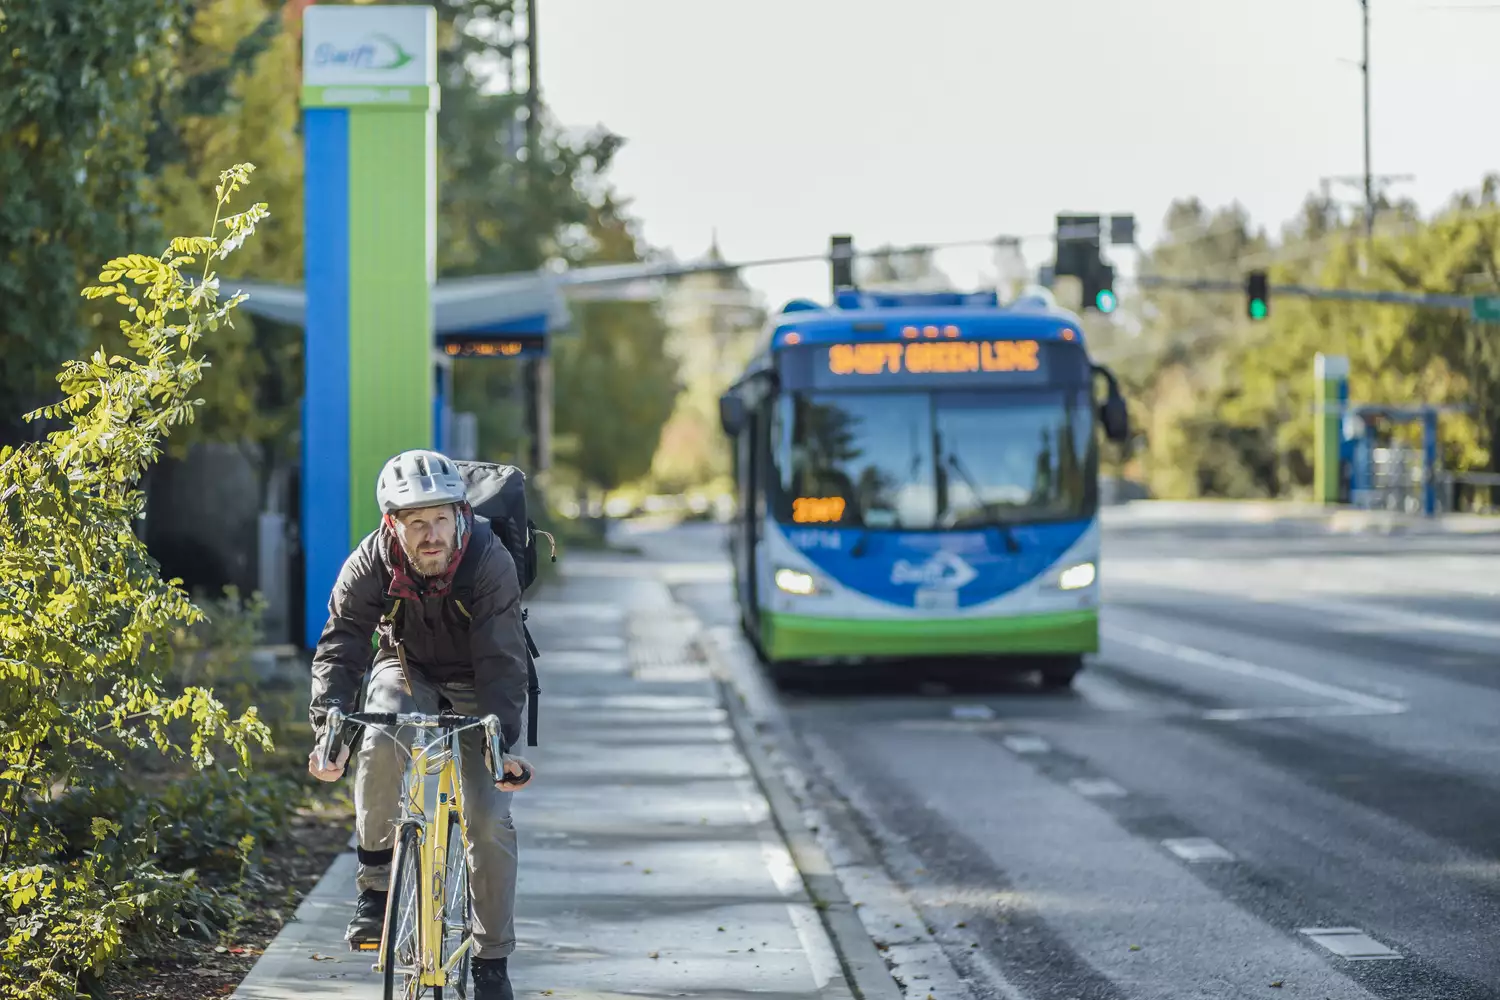 A biker connects to a Swift bus.